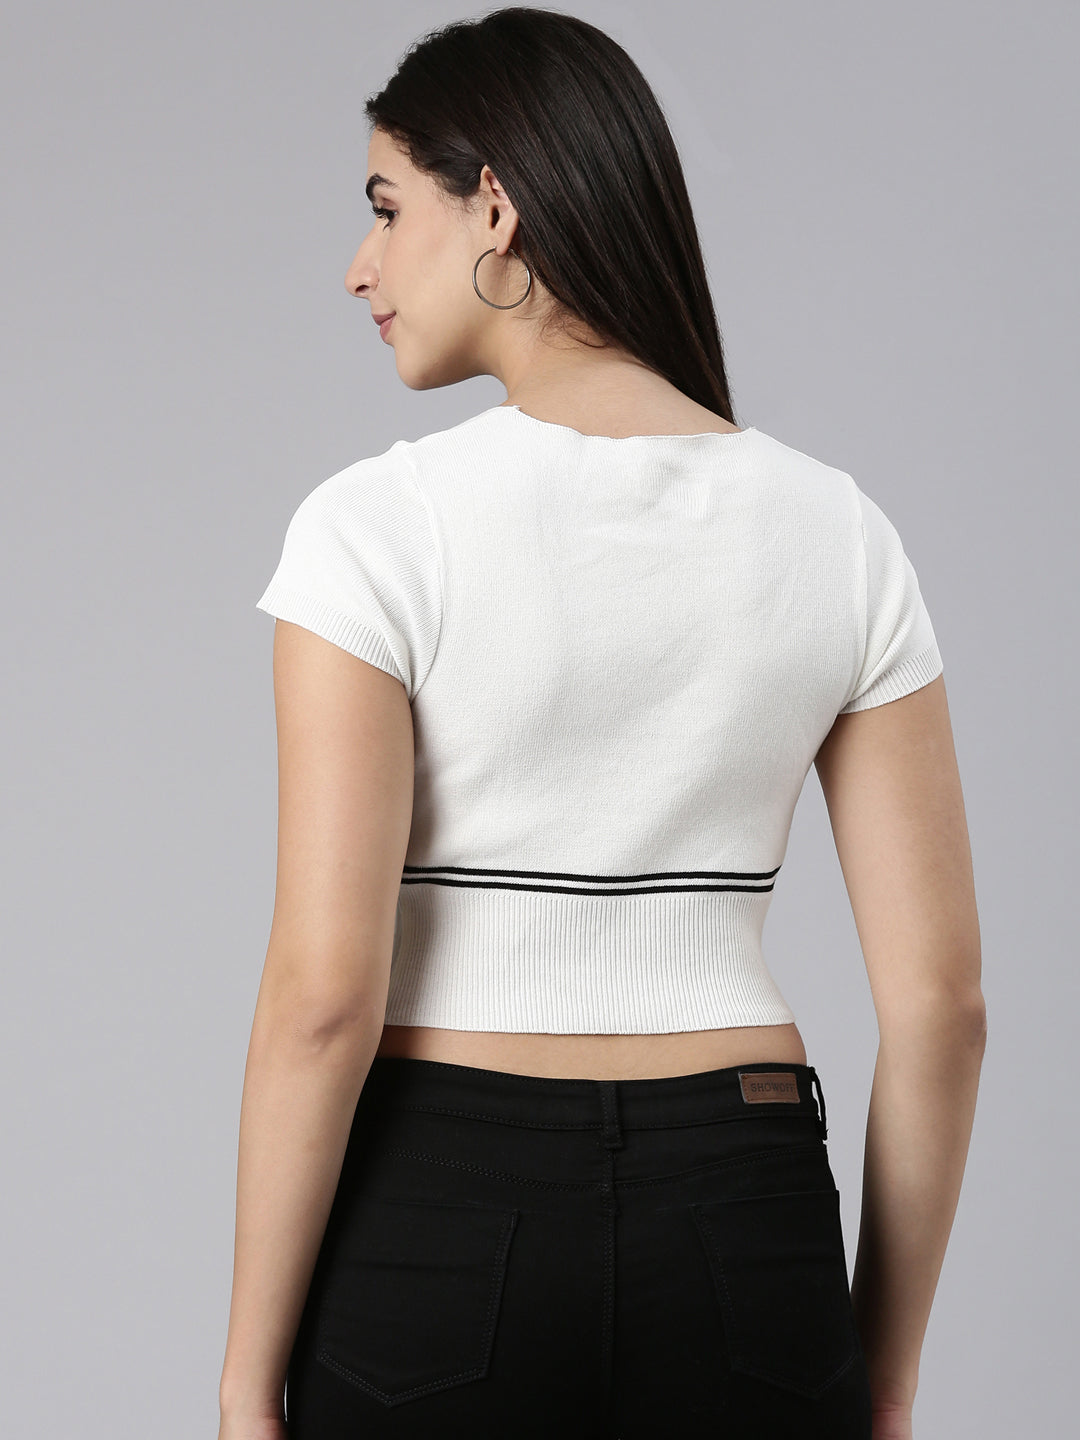 Scoop Neck Solid White Fitted Crop Top